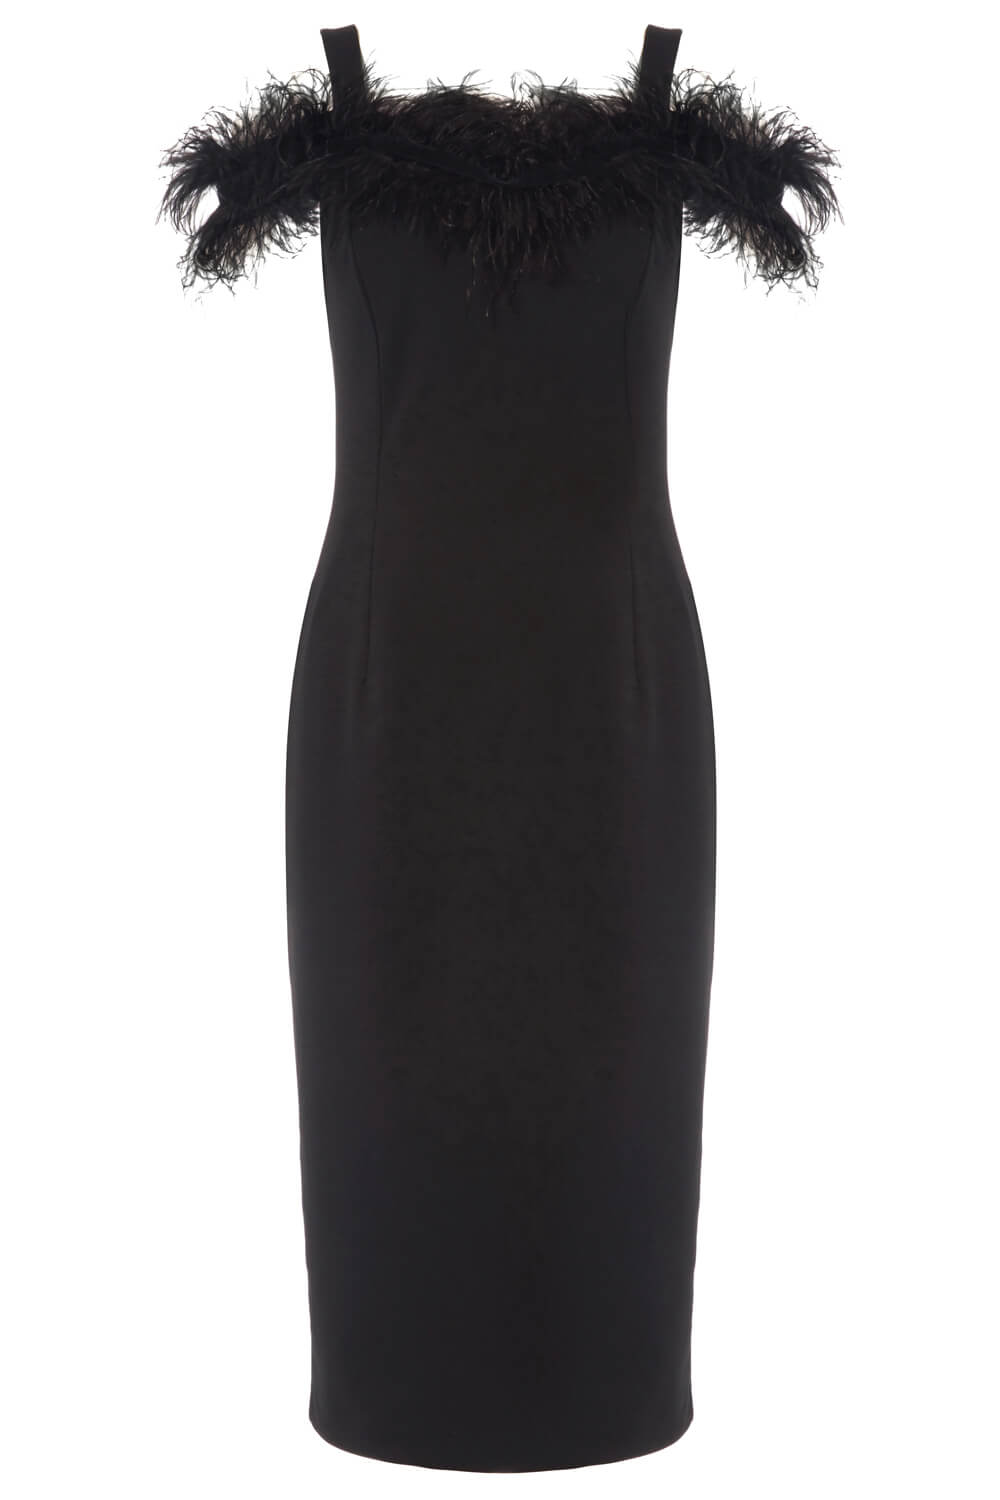 Black Feather Embellished Fitted Dress, Image 5 of 5